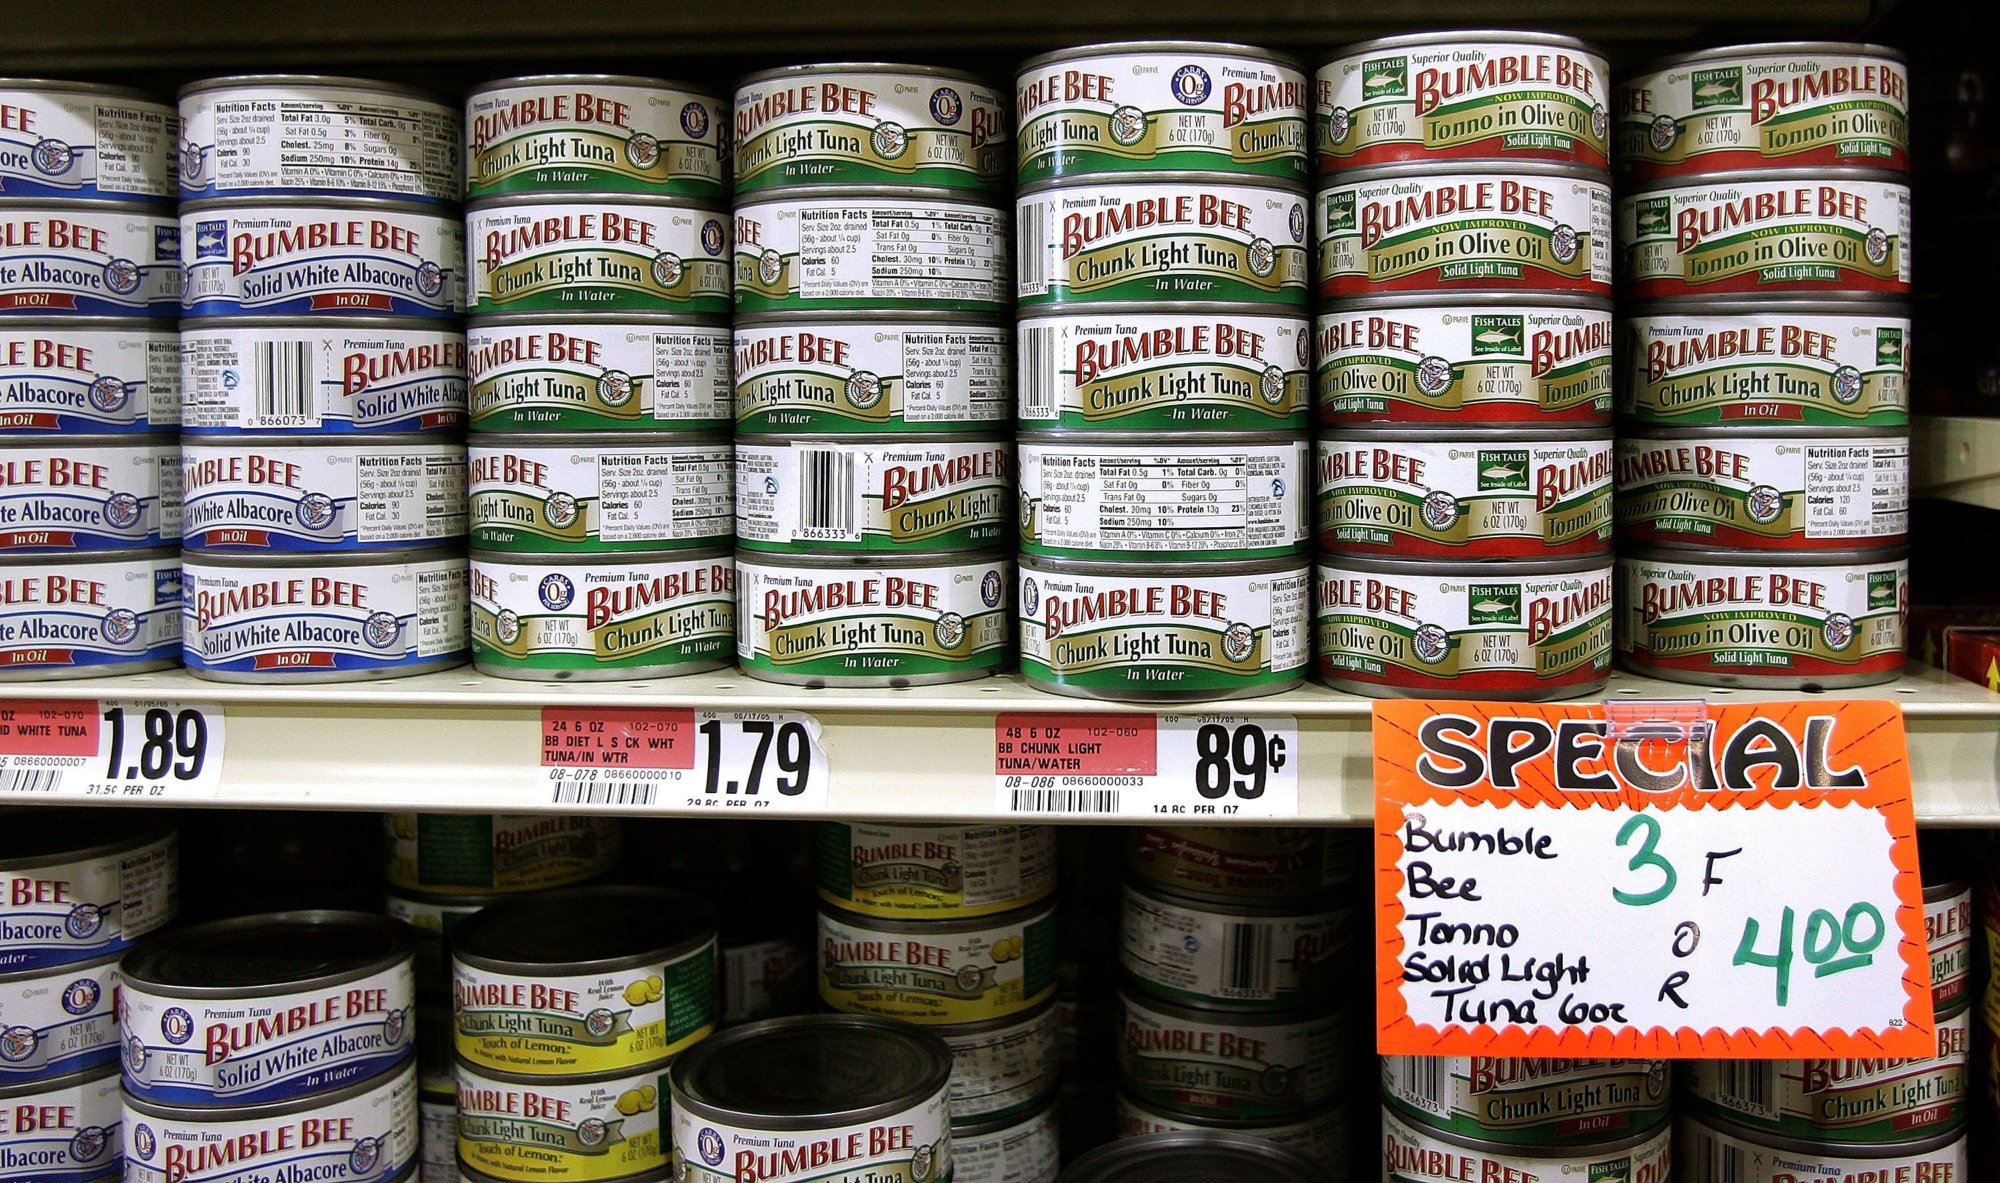 DES PLAINES, IL - JANUARY 27:  Cans of tuna fish are displayed in a grocery store January 27, 2006 in Des Plaines, Illinois. New data released by the Food and Drug Administration this week shows that 6 percent of canned light tuna samples contained high levels of mercury, which can cause learning disabilities in children and neurological problems in adults. The study, conducted between 2001 and 2005, found high mercury levels in Chilean sea bass as well.  (Photo by Tim Boyle/Getty Images)